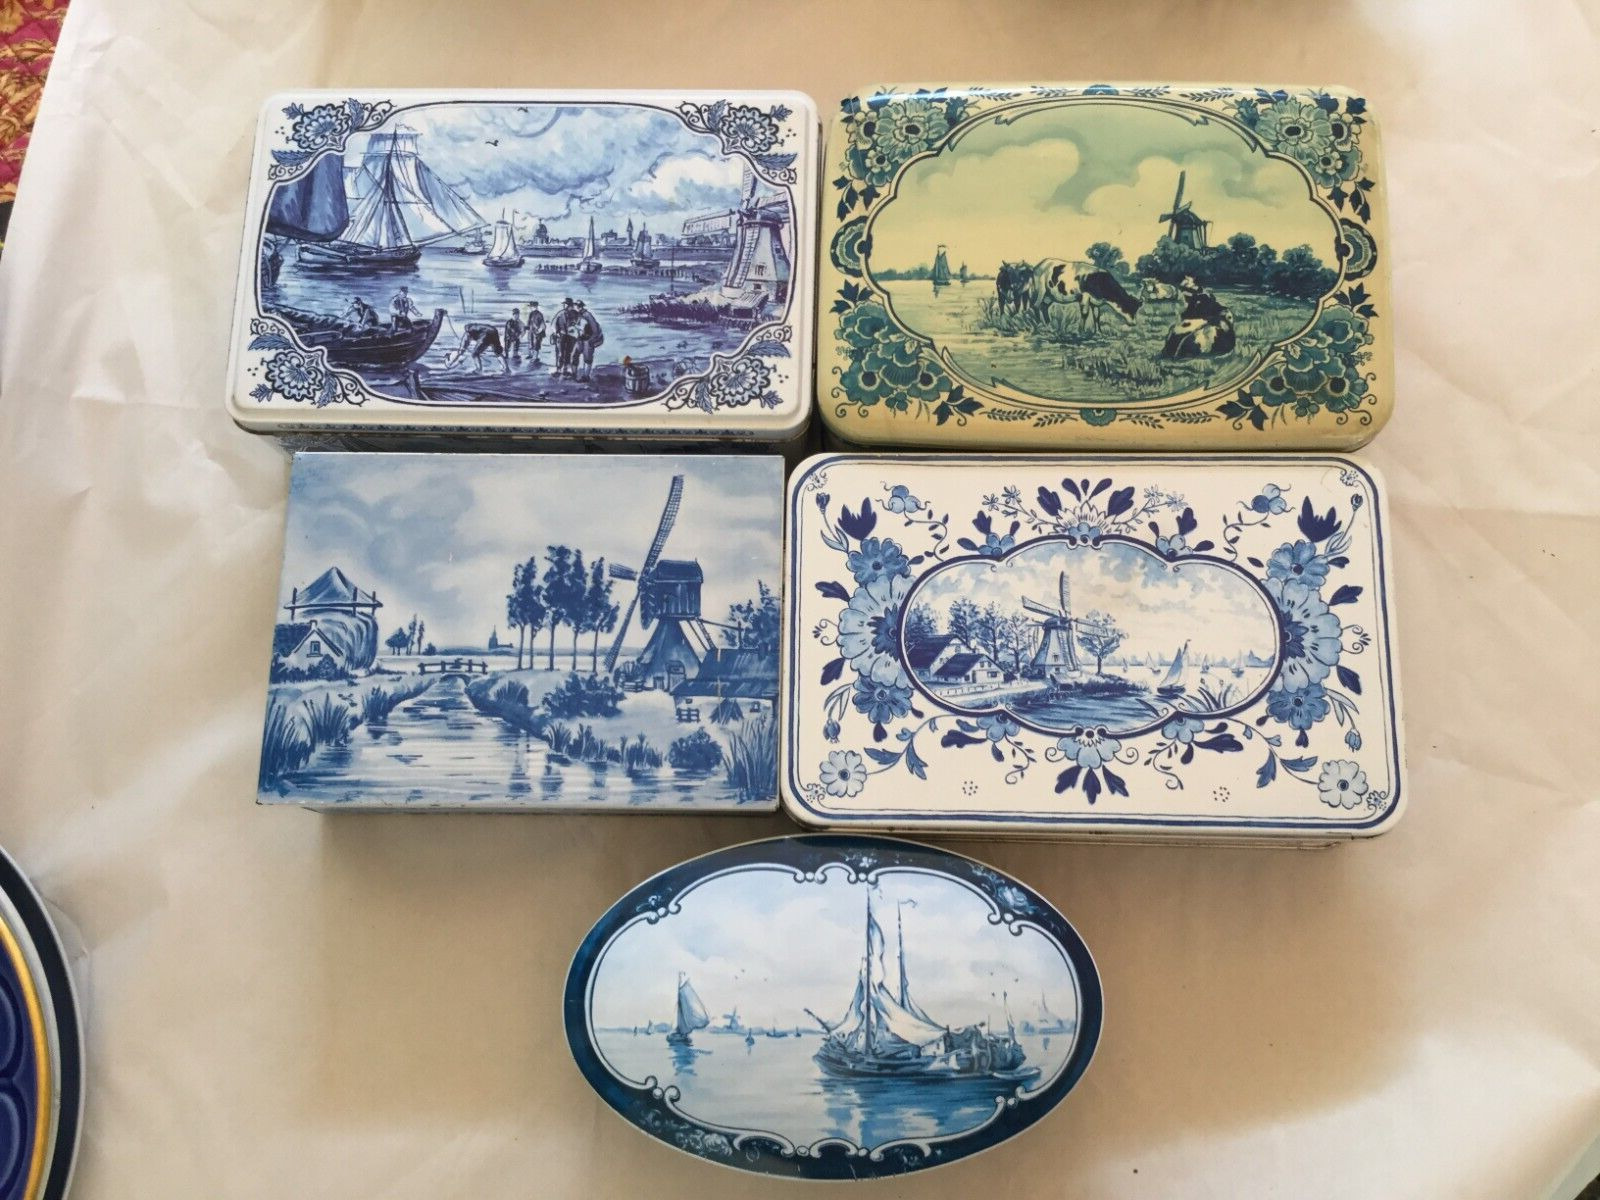 VINTAGE LOT OF 5 DELFT STORAGE TINS EACH ONE HAS SCENES FROM HOLLAND